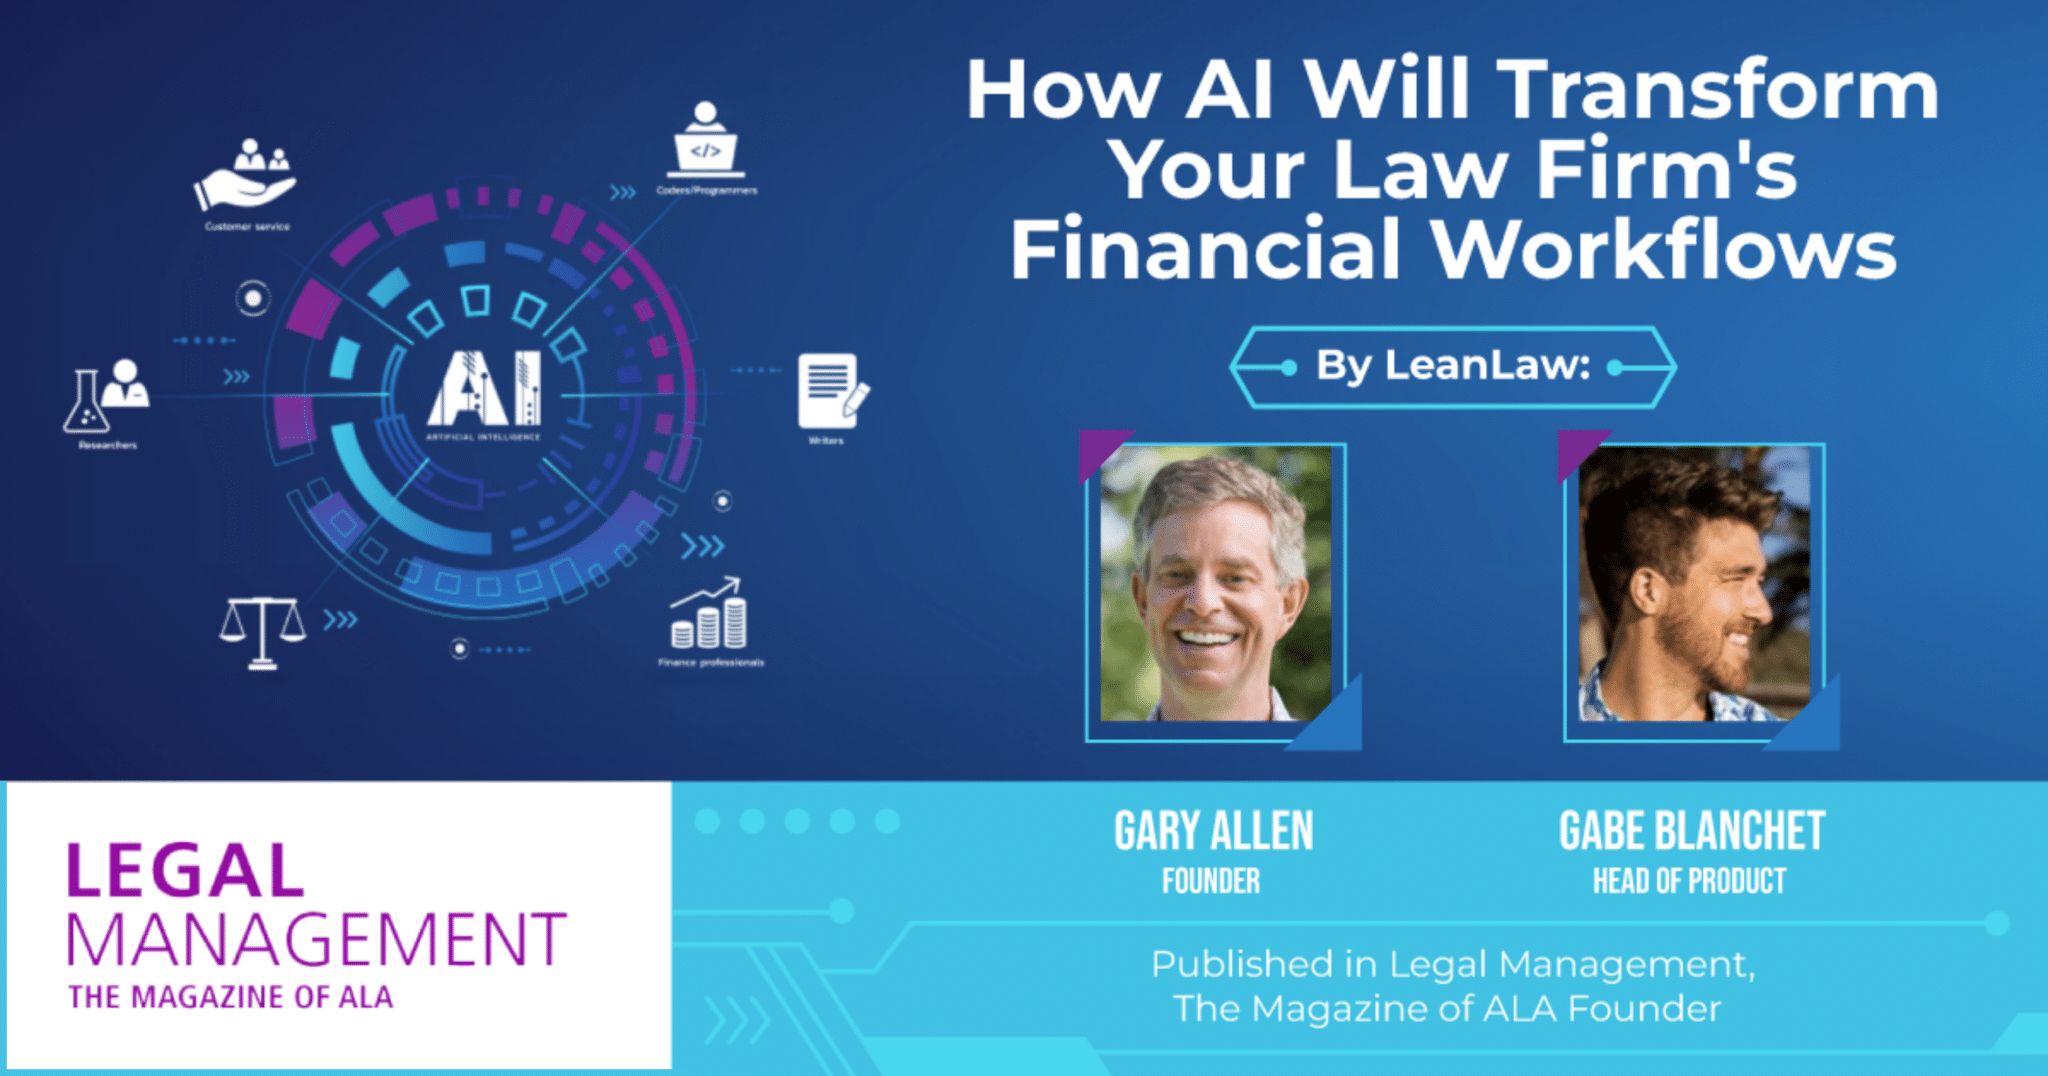 How AI Will Transform Your Law Firm's Financial Workflows